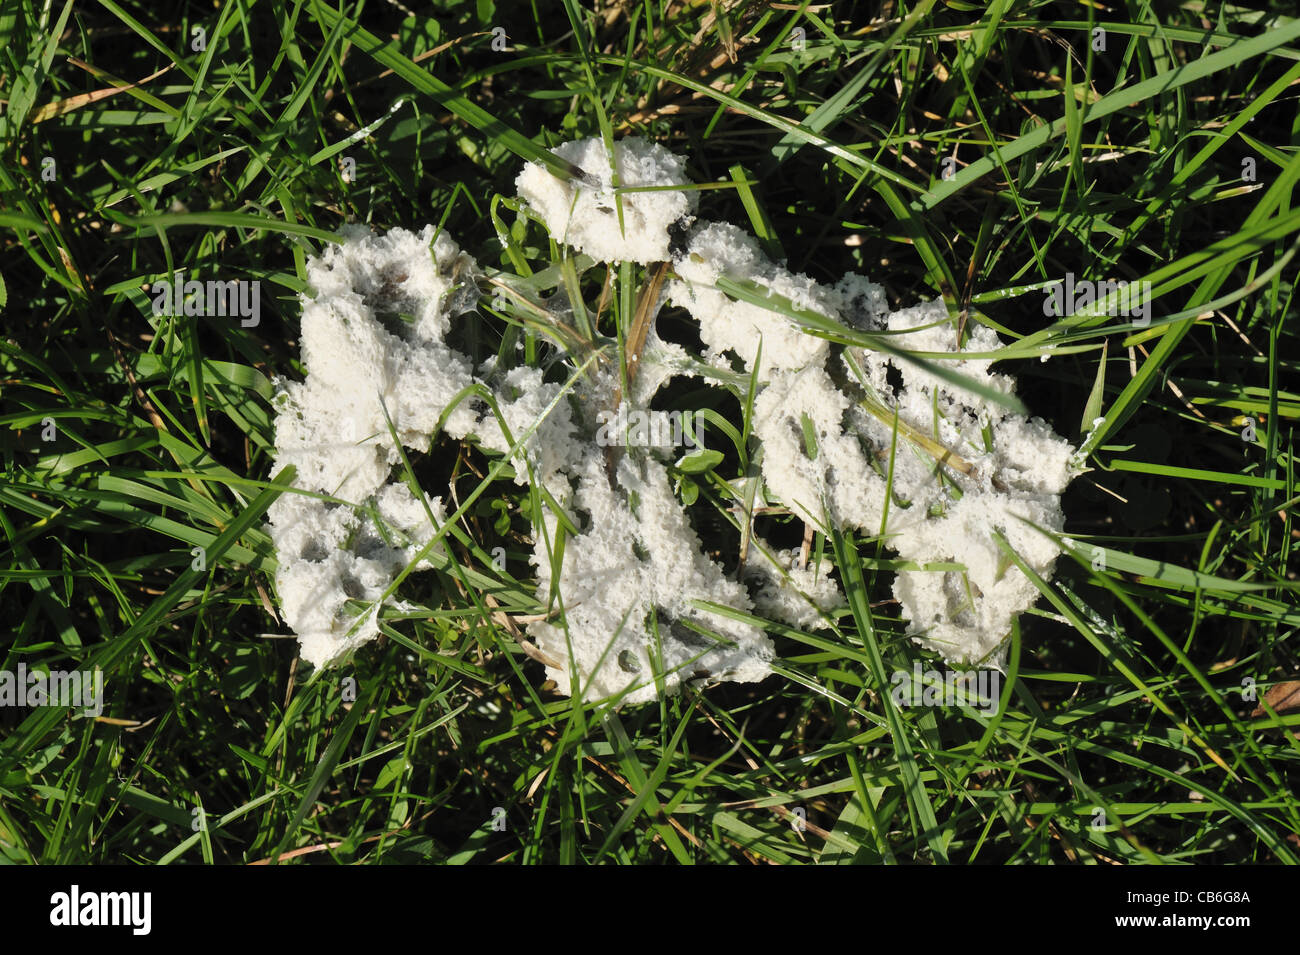 Freshly formed slime mould (Mucilago crustacea) on ryegrass pasture Stock Photo